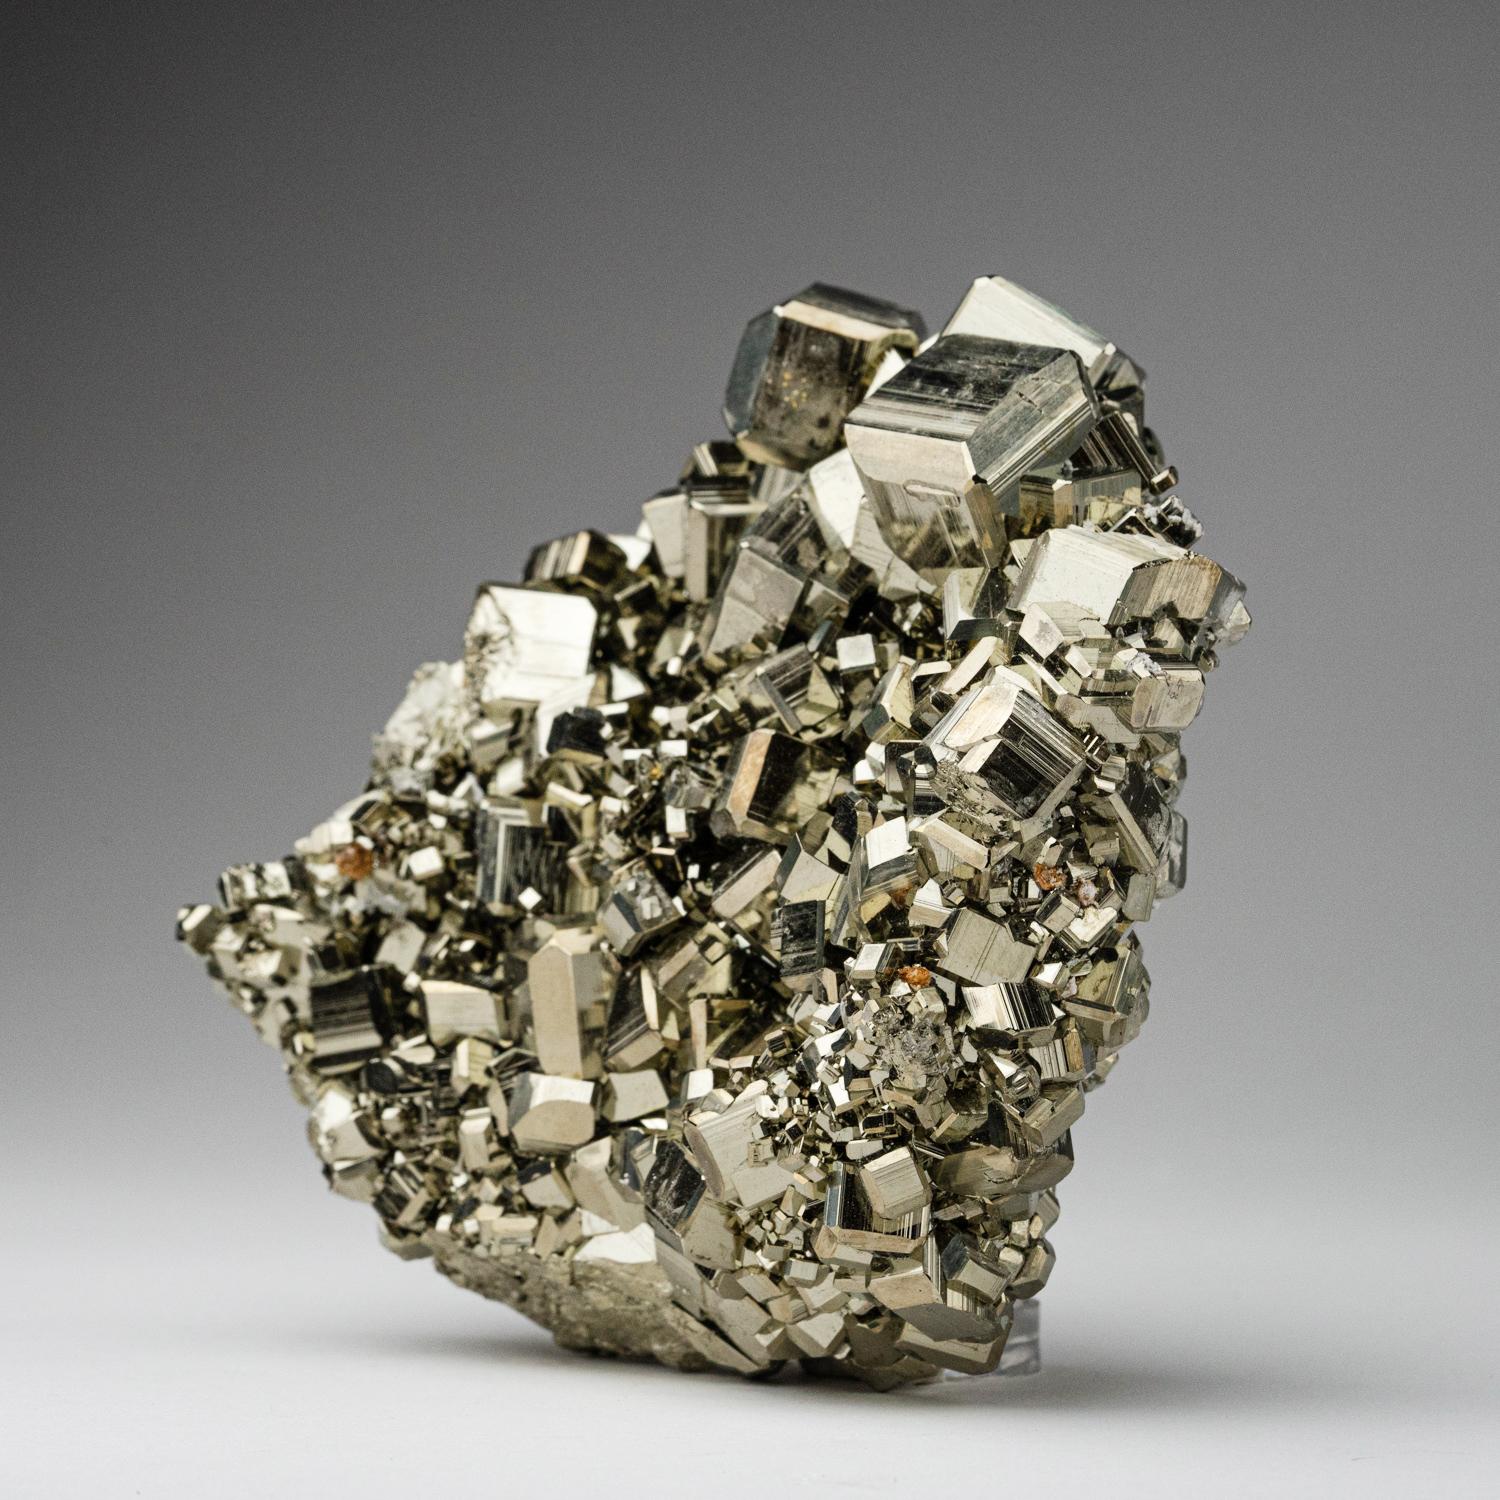 A world-class cluster of perfectly terminated cubic Pyrite crystals, interlocked on it's natural Basalt matrix. This specimen was discovered in the famous mines of Huanuco Province, Peru - considered one of the finest locations in the world for